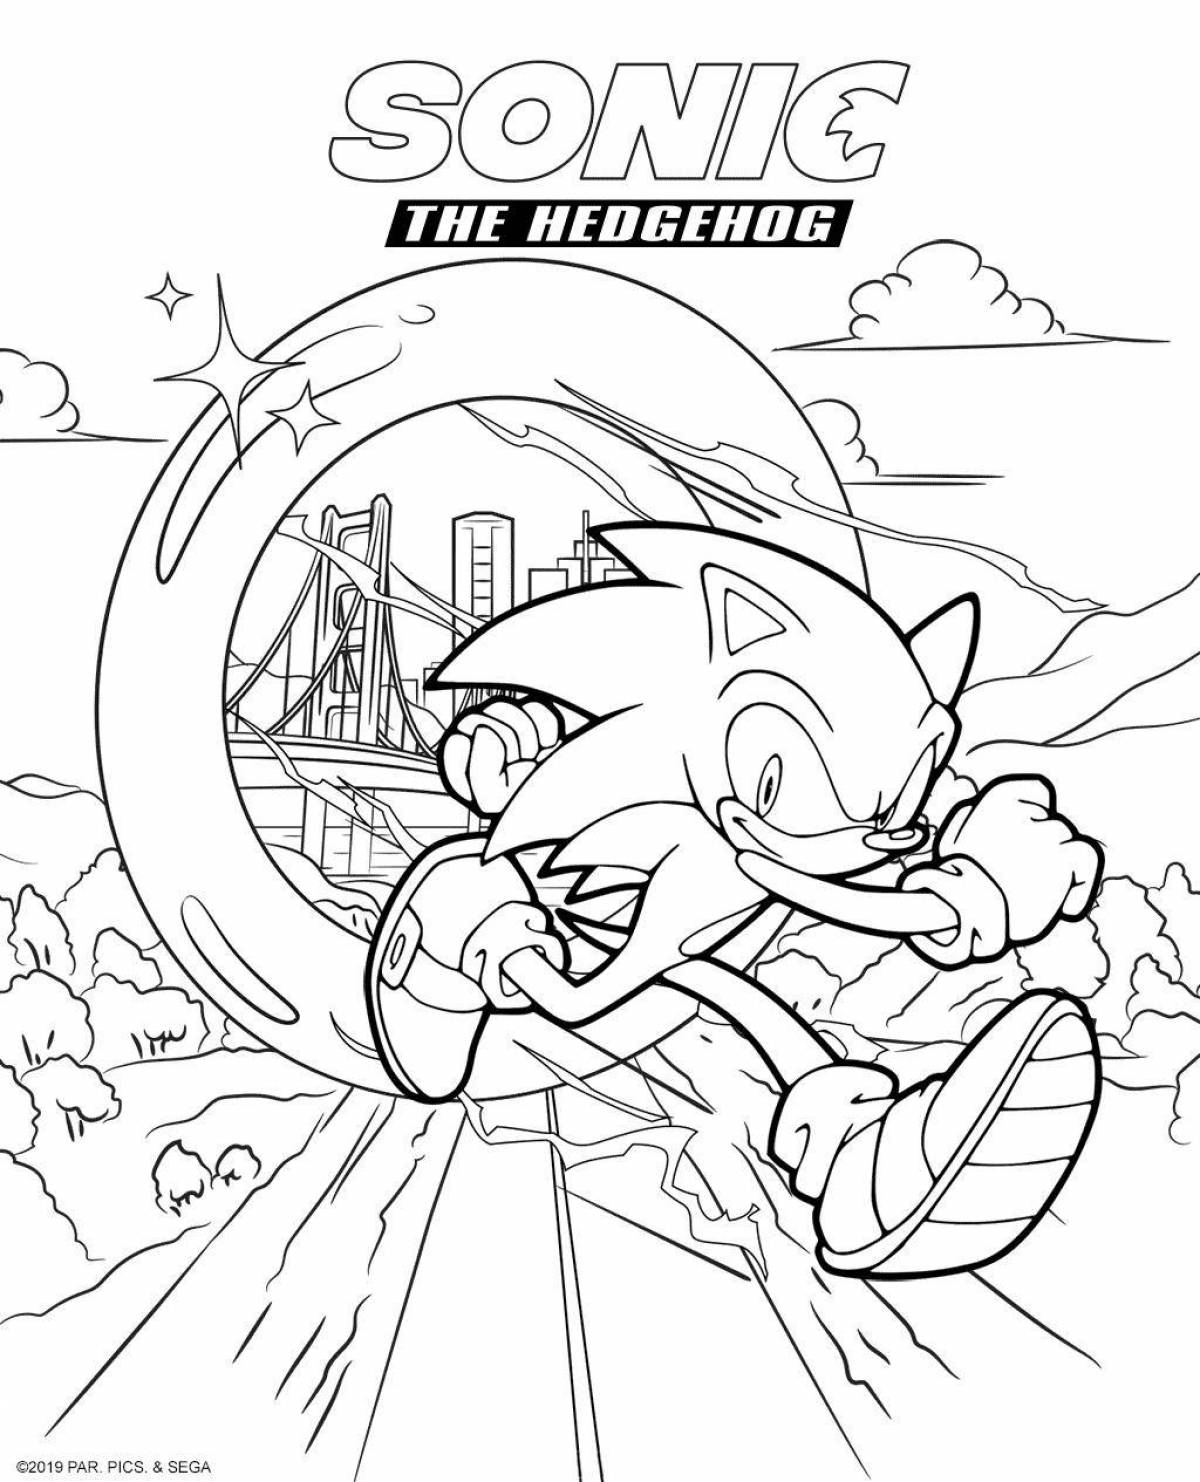 Sonic god glowing coloring book